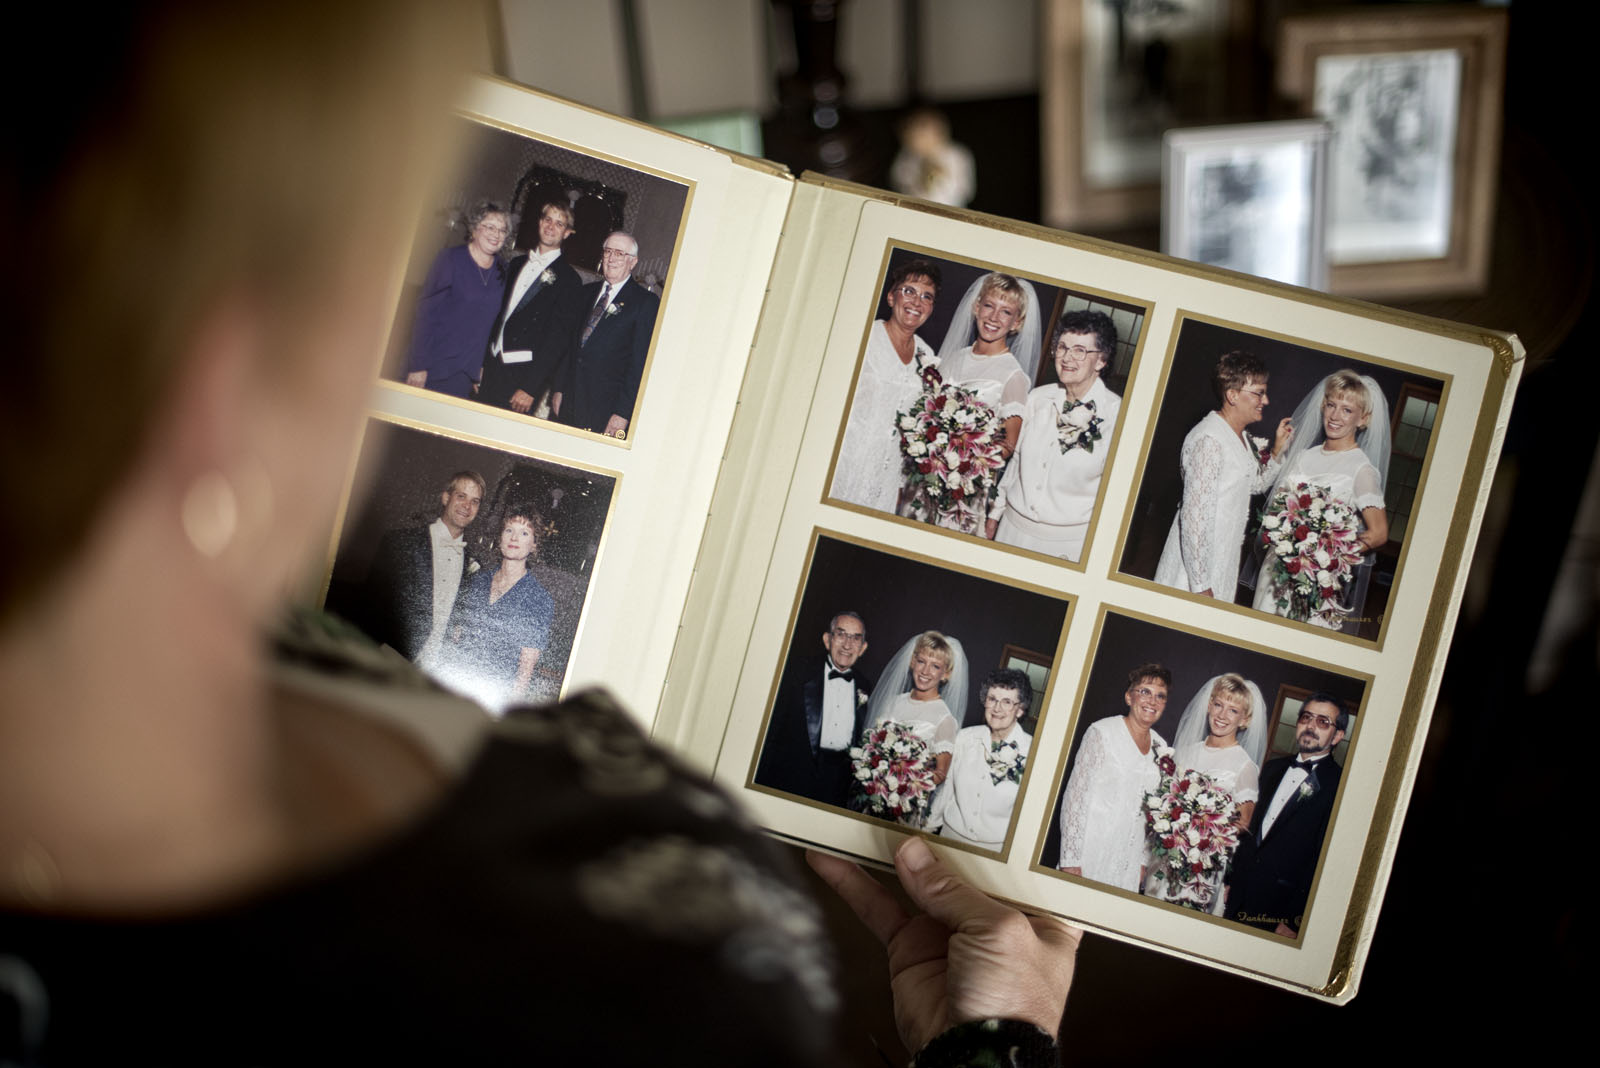 Kristin Sigg looks at wedding photos that include her mother. 